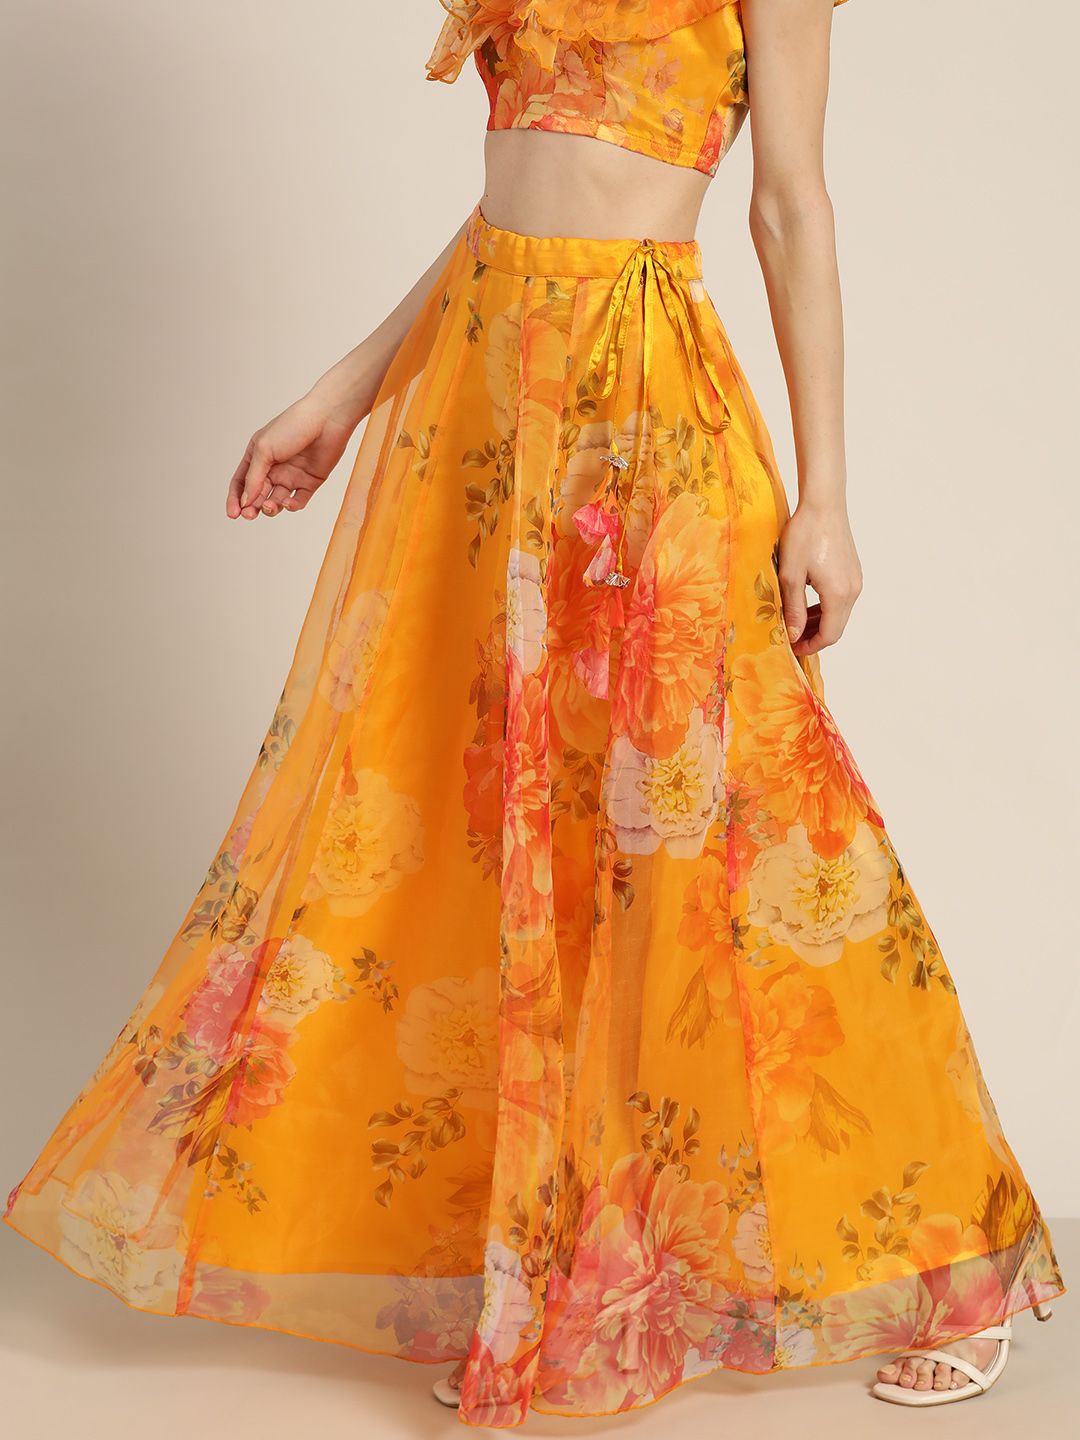 Shae by SASSAFRAS Yellow Floral Organza Anarkali Flared Skirt Price in India